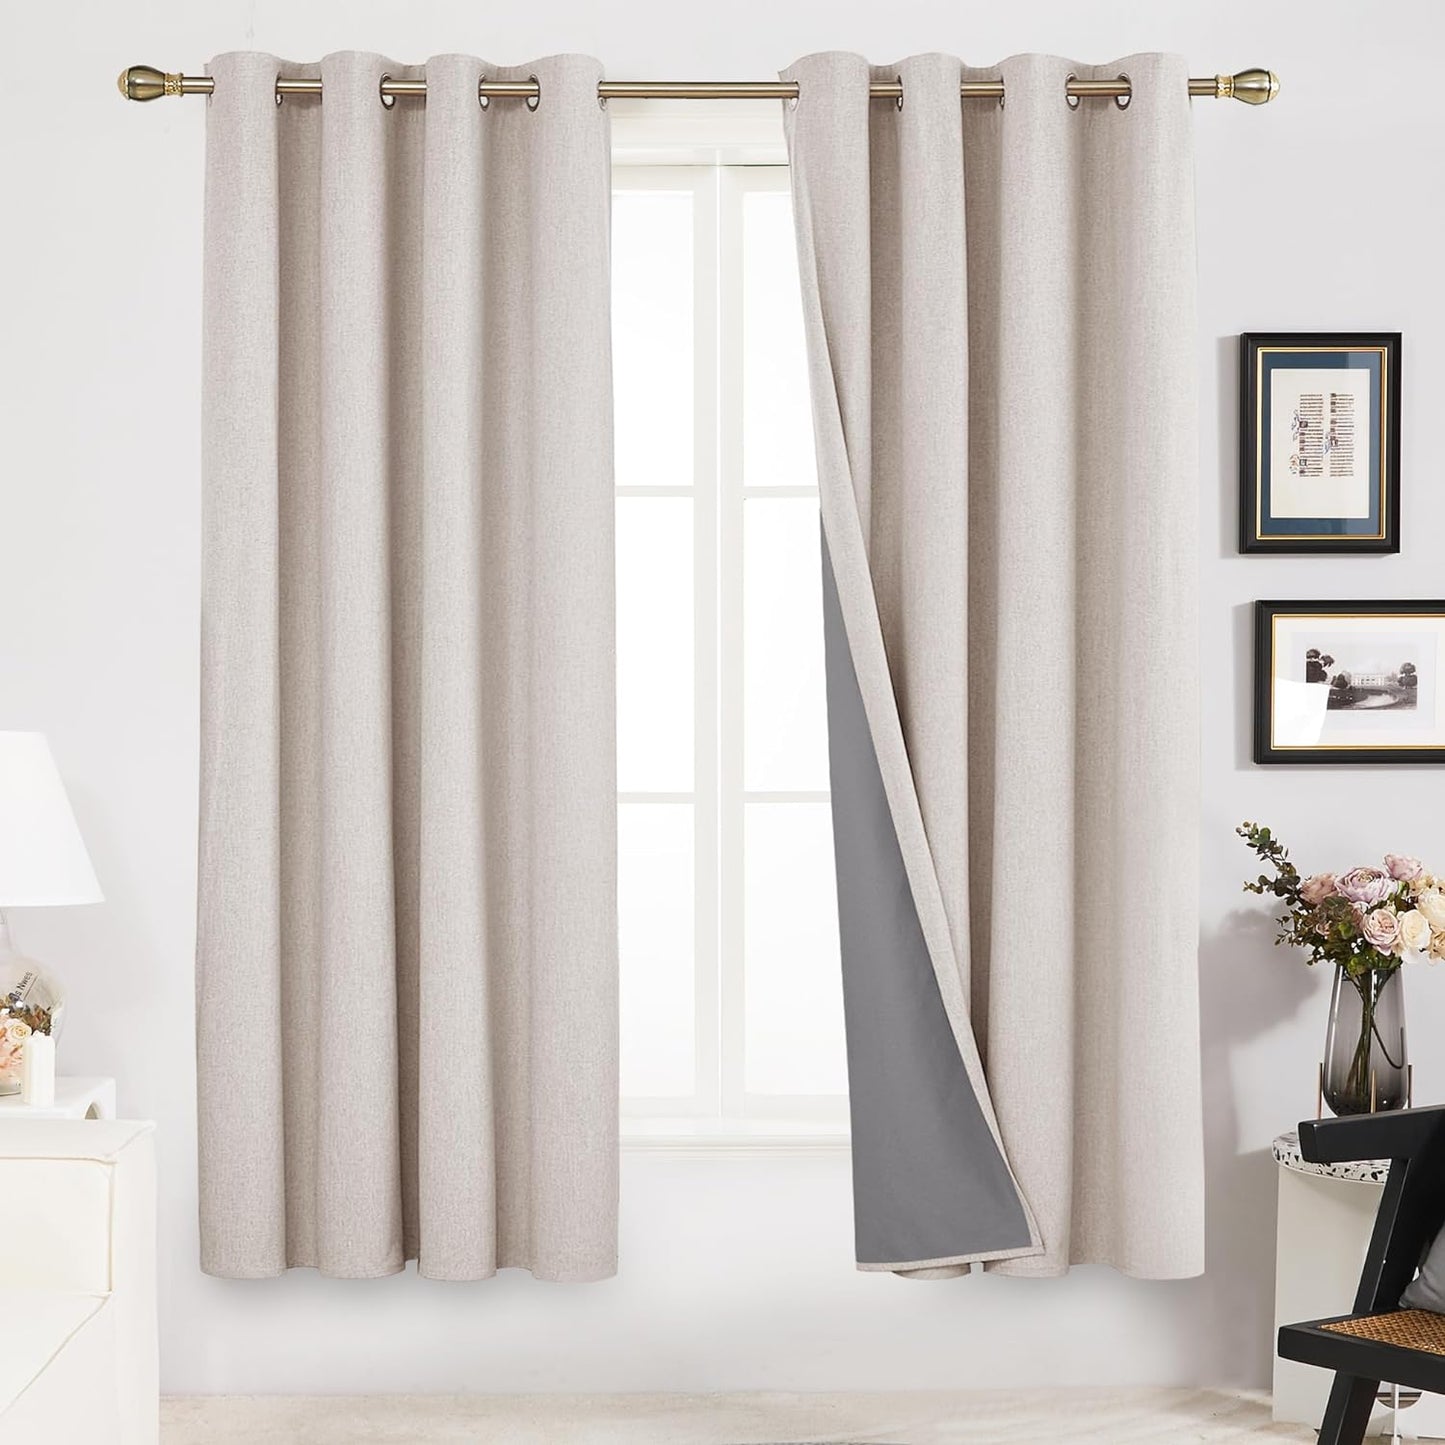 Deconovo Linen Blackout Curtains 84 Inch Length Set of 2, Thermal Curtain Drapes with Grey Coating, Total Light Blocking Waterproof Curtains for Indoor/Outdoor (Light Grey, 52W X 84L Inch)  Deconovo Flaxen 52X72 Inches 